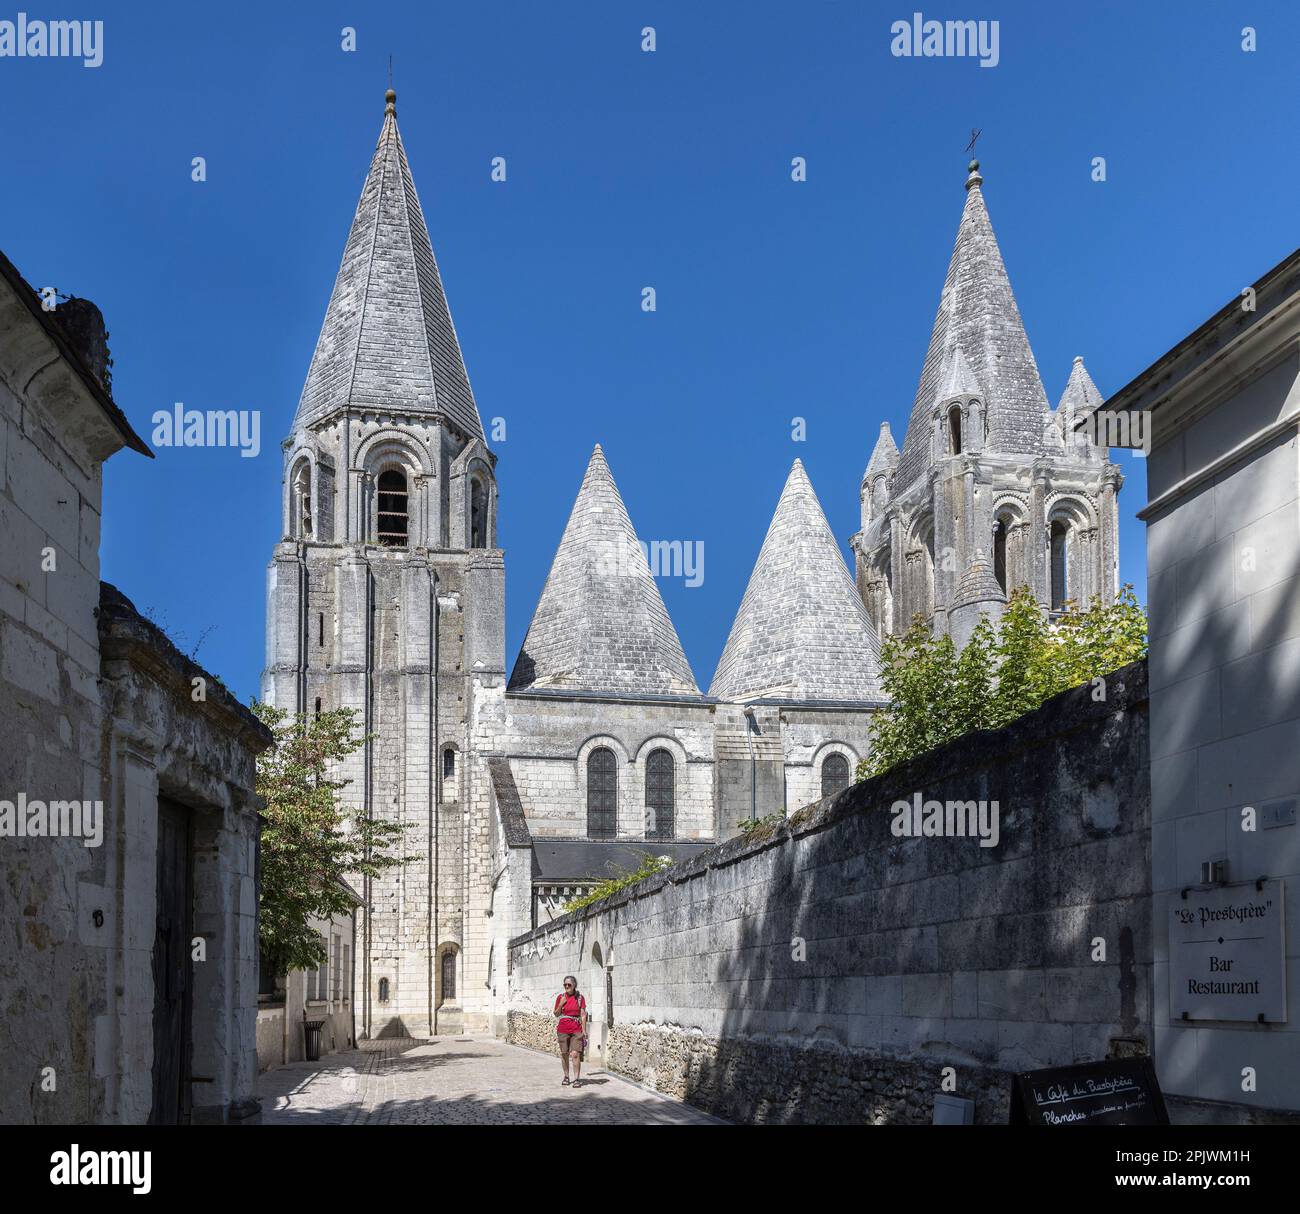 Person walking in street past the church of St Ours, Loches, Indre-et-Loire, central France Stock Photo